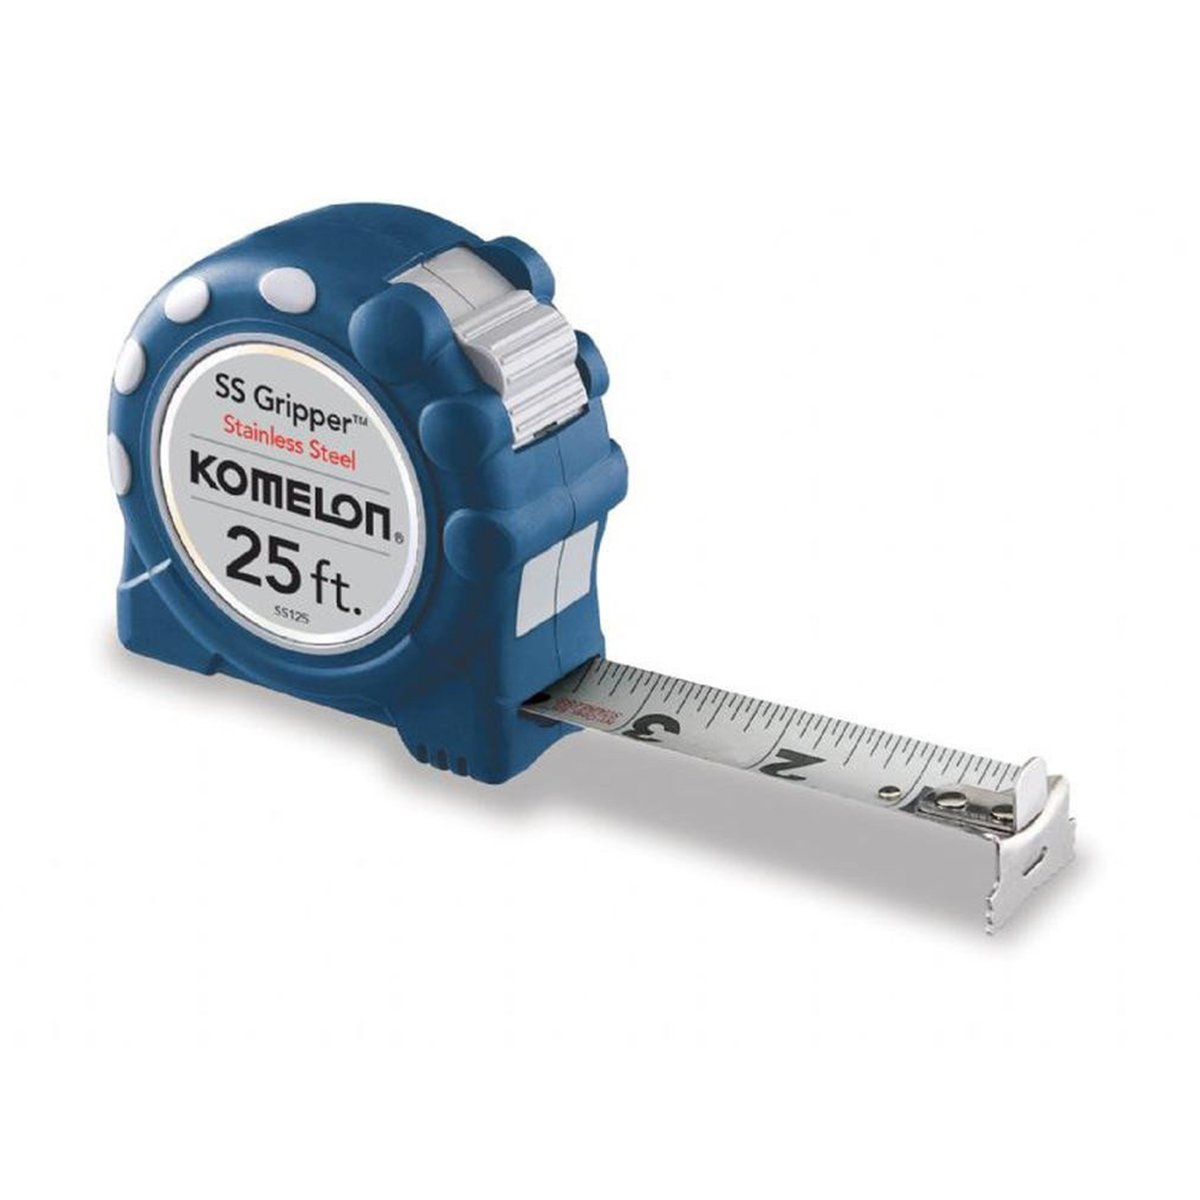 Komelon Stainless Steel Gripper 25 foot tape measure has rubberized case for grip and protection, SS blade and hook.